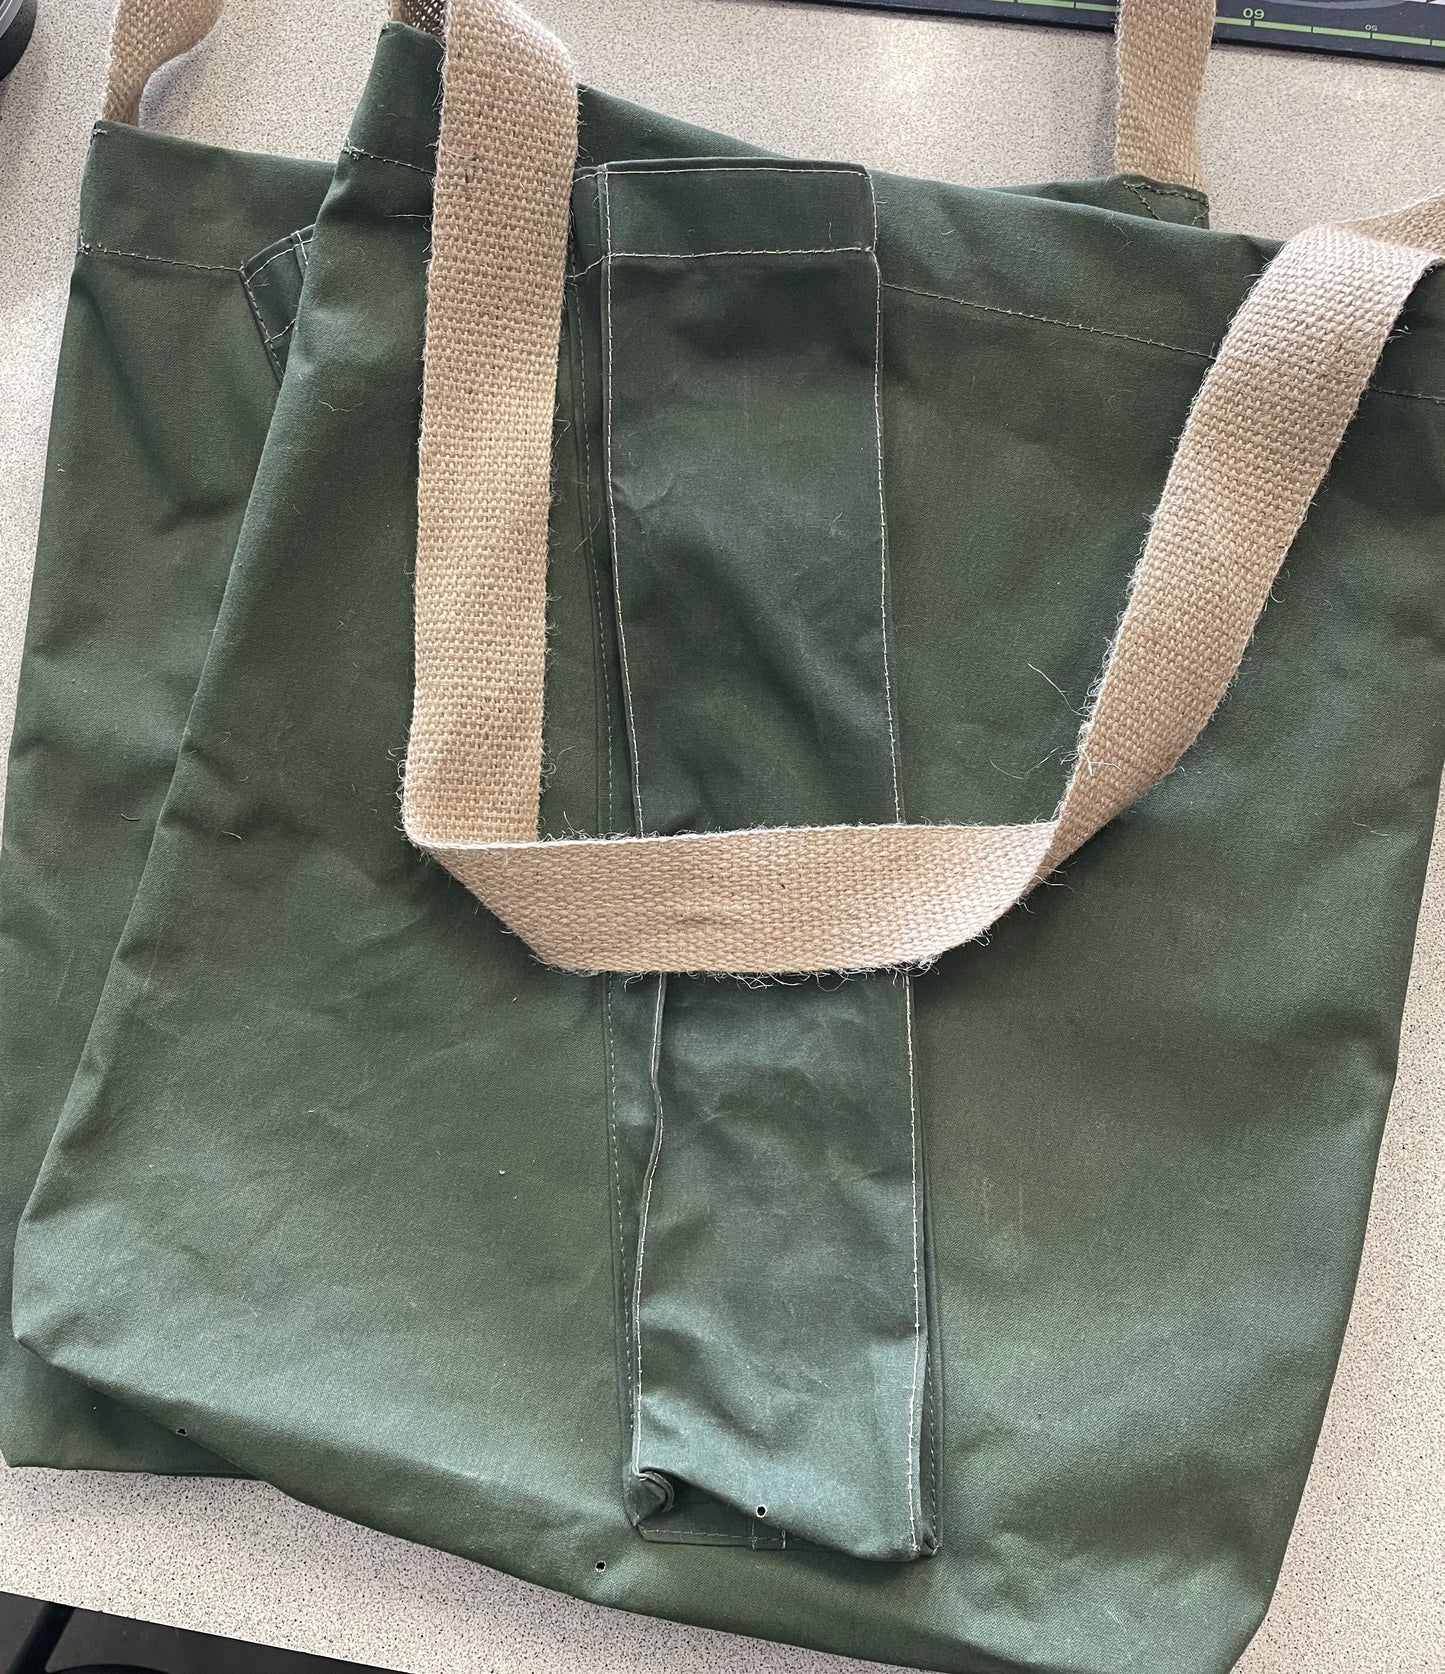 Wading Bag - Canvas with Net Pouch